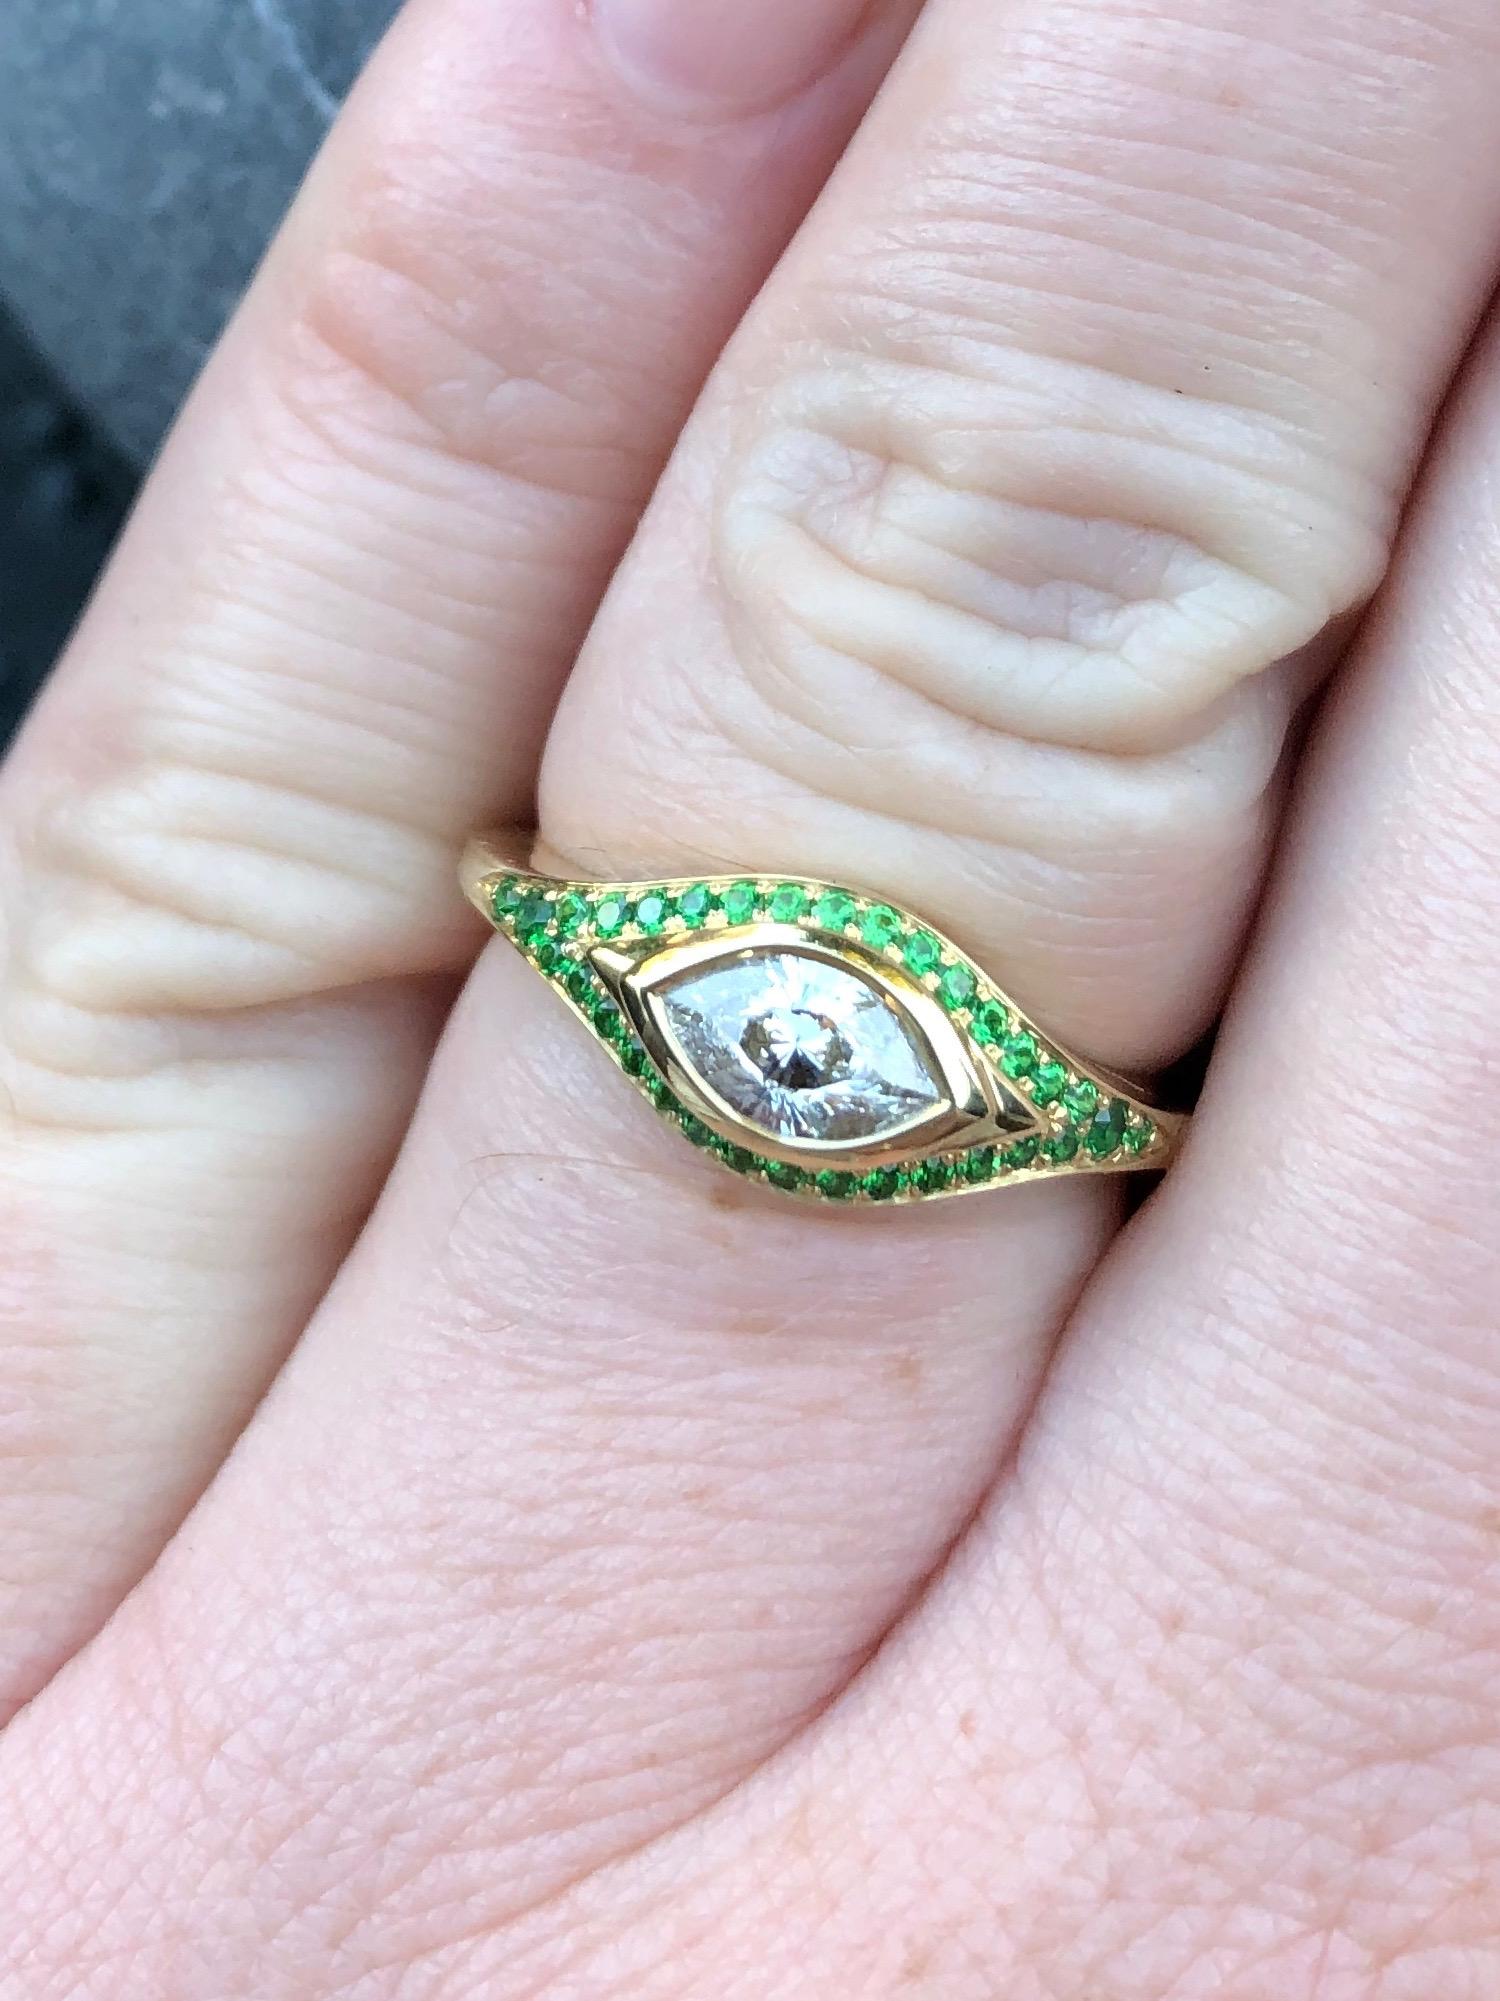 A singular Cleopatra's eye cut diamond (E/VS- 0.64 ct) with a tsavorite pavé. An engagement truly like no other, this diamond is absolutely fascinating. 
Hand carved wax/cast, made by hand start to finish by our master goldsmith.

Size 7.25 (can be